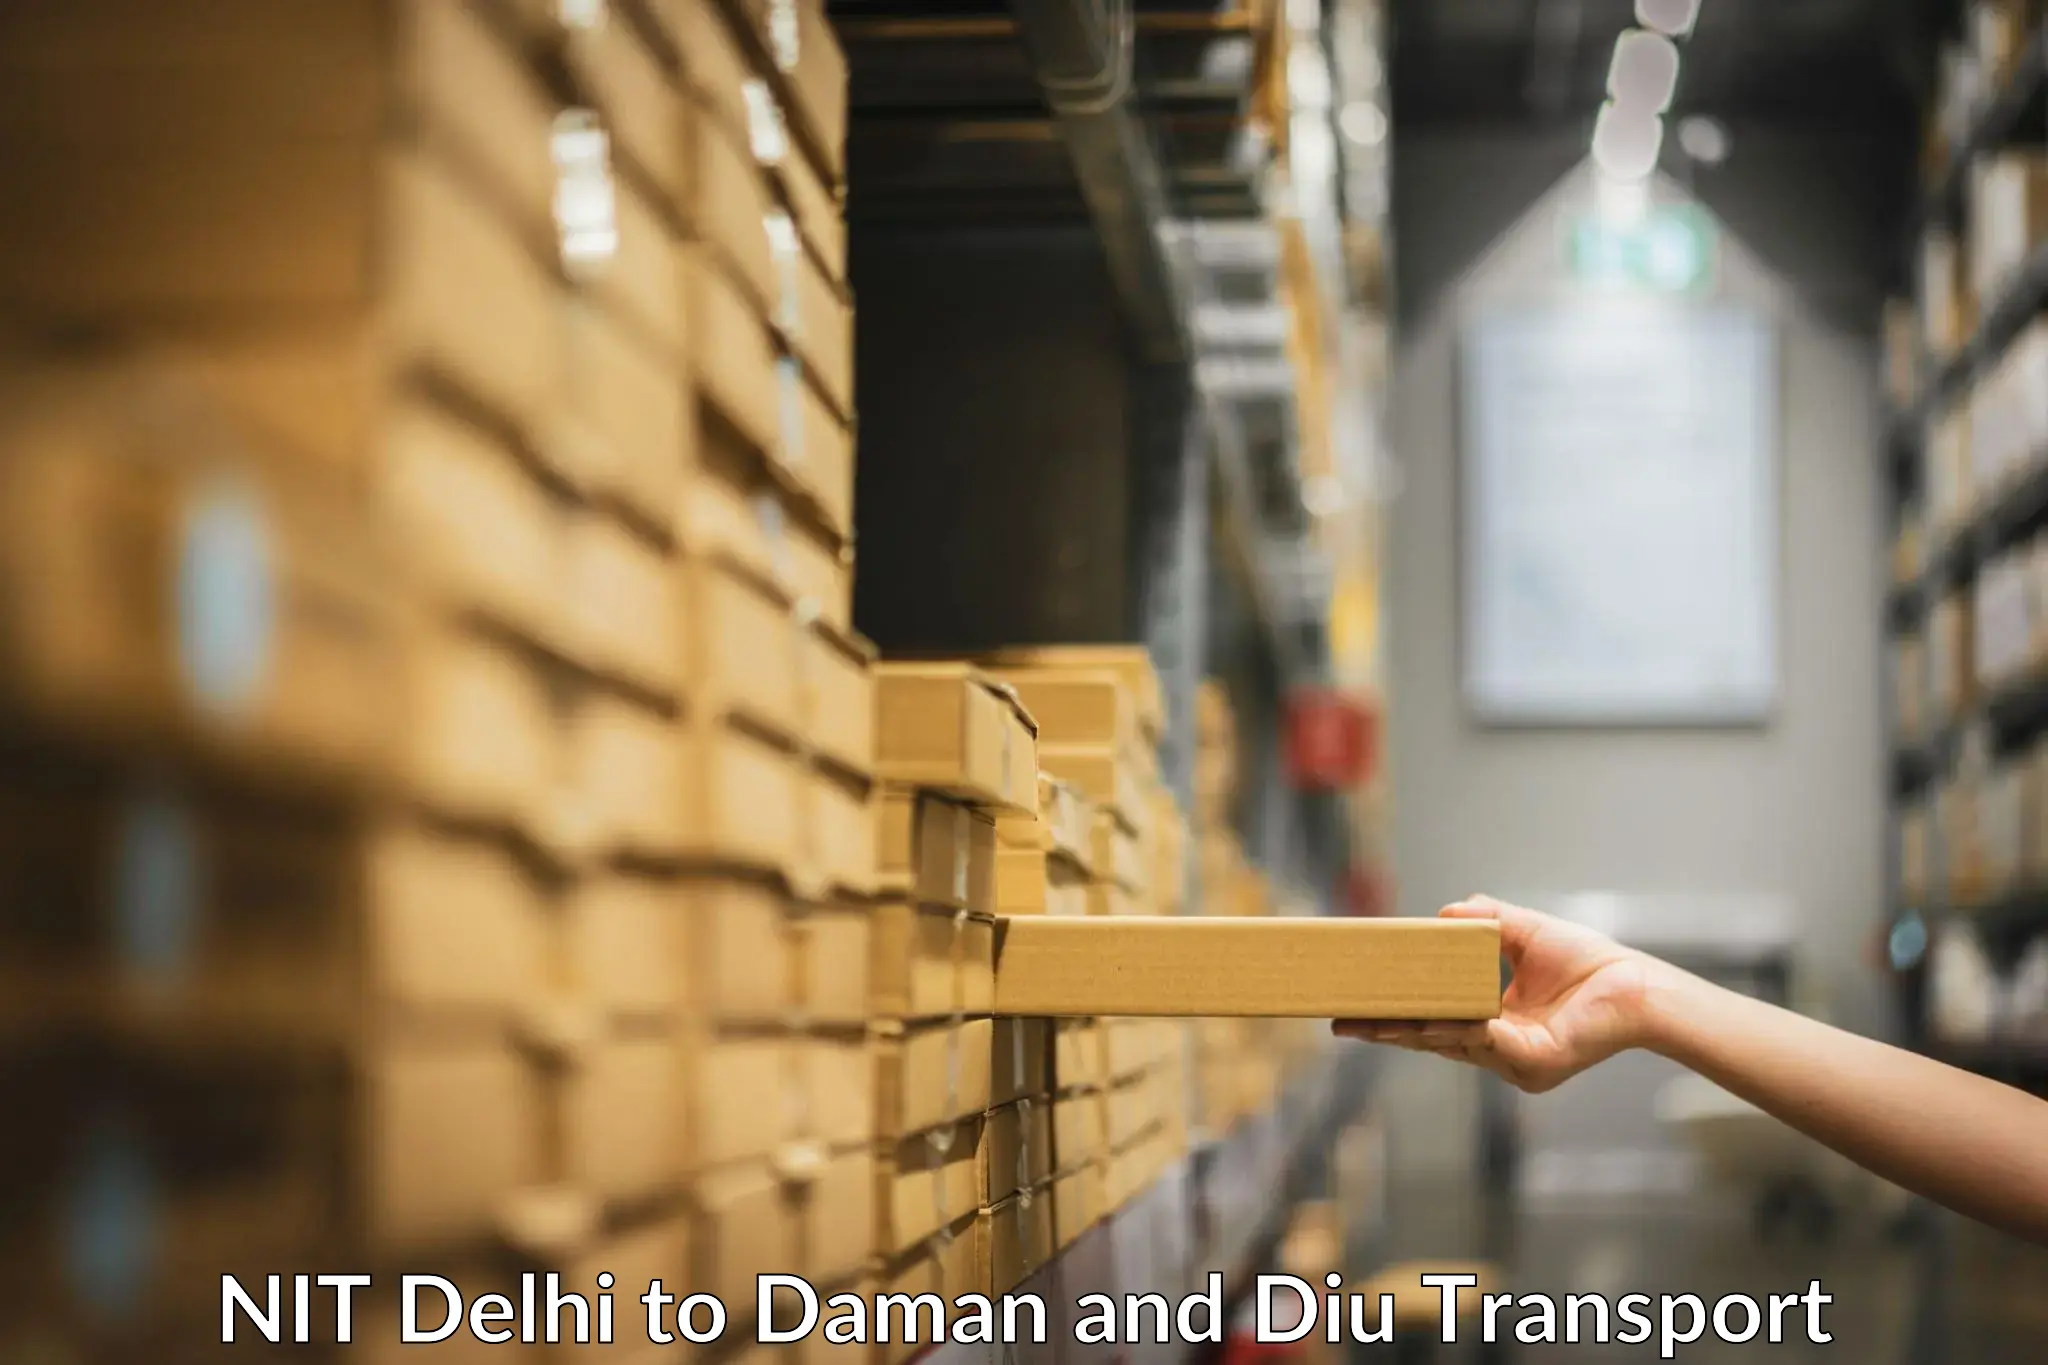 Road transport online services NIT Delhi to Daman and Diu